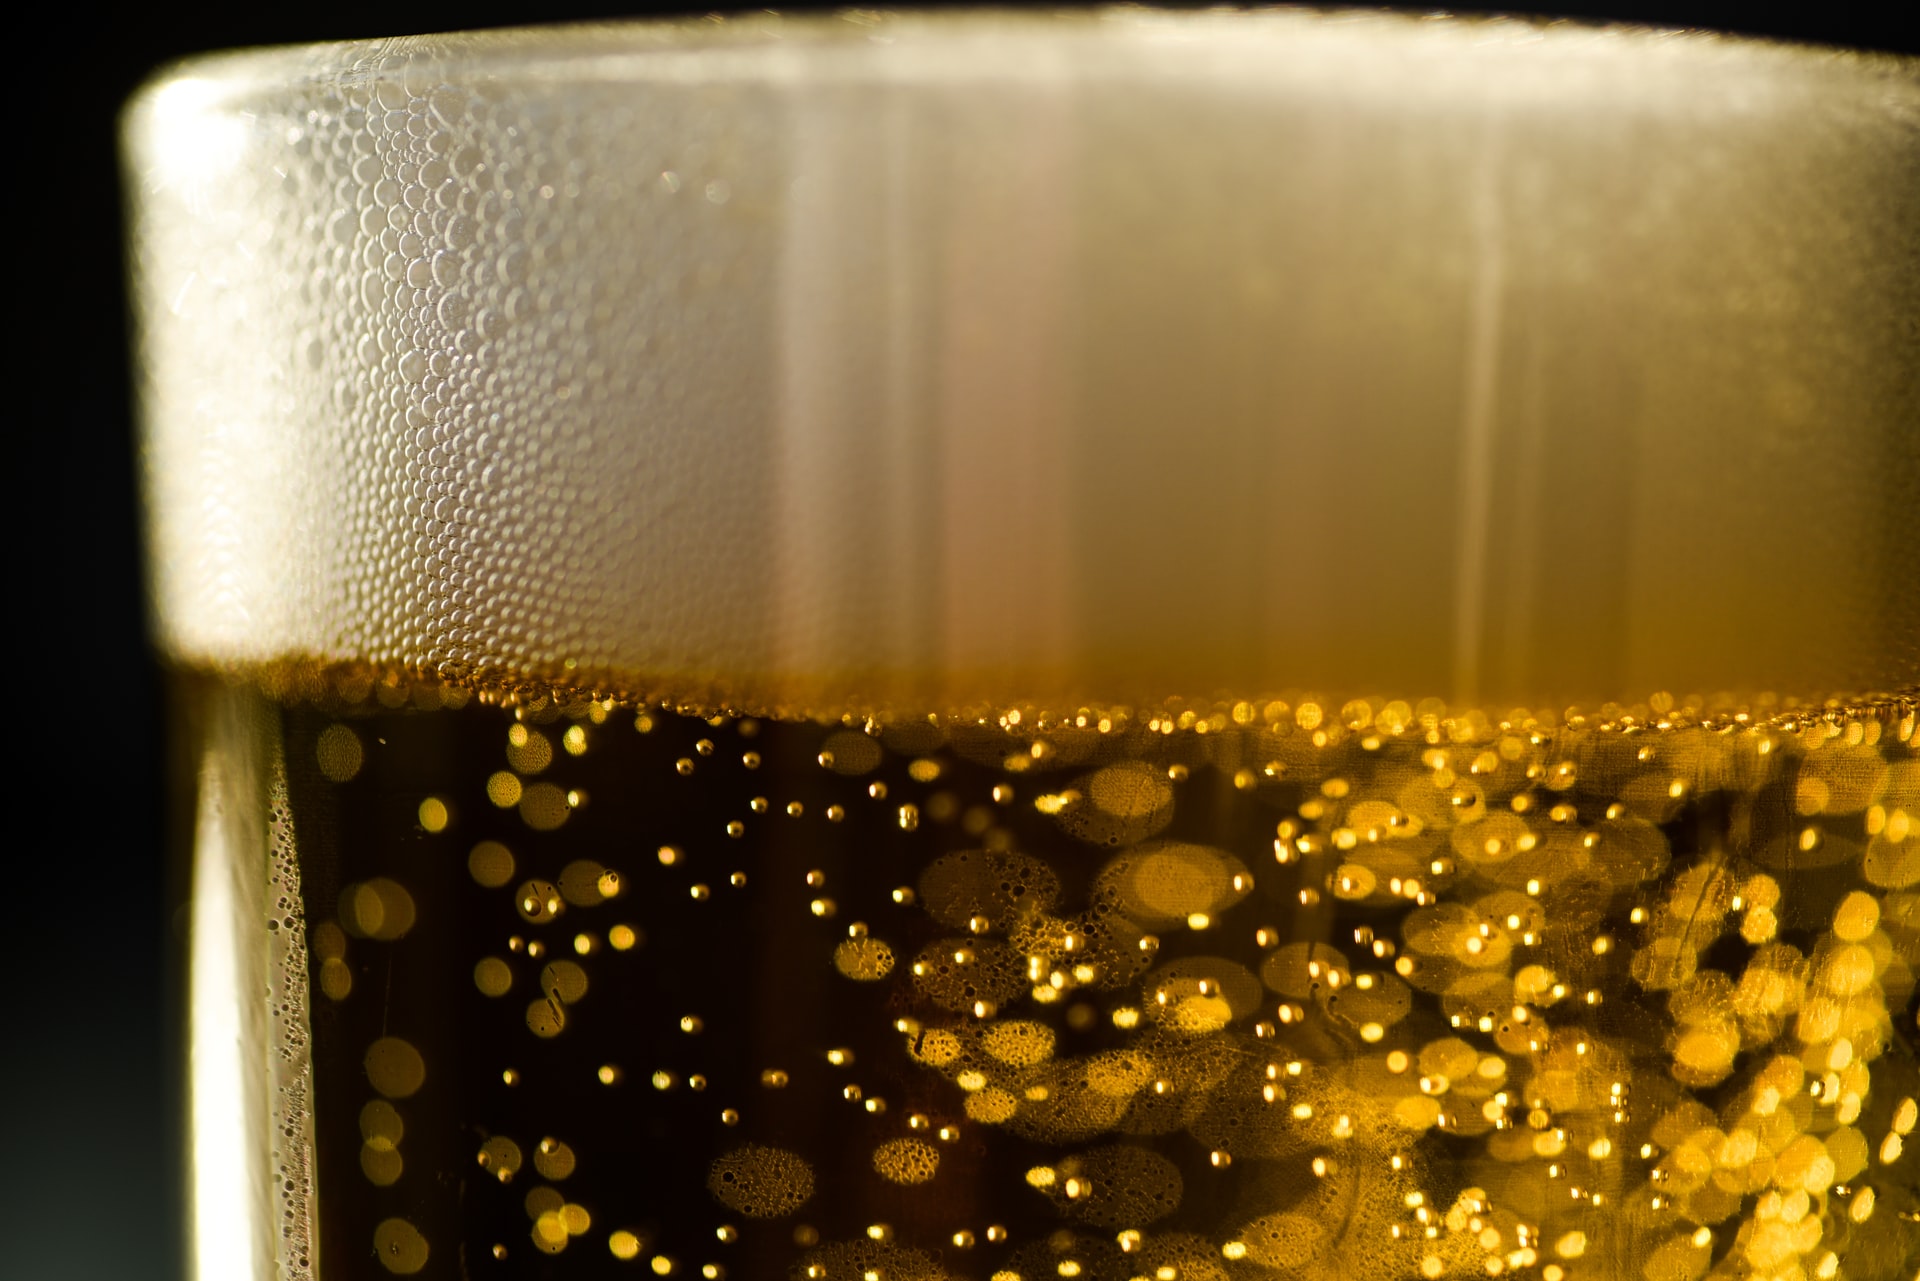 Filled beer glass with carbon dioxide bubbles (Photo: YesMore Content on Unsplash)